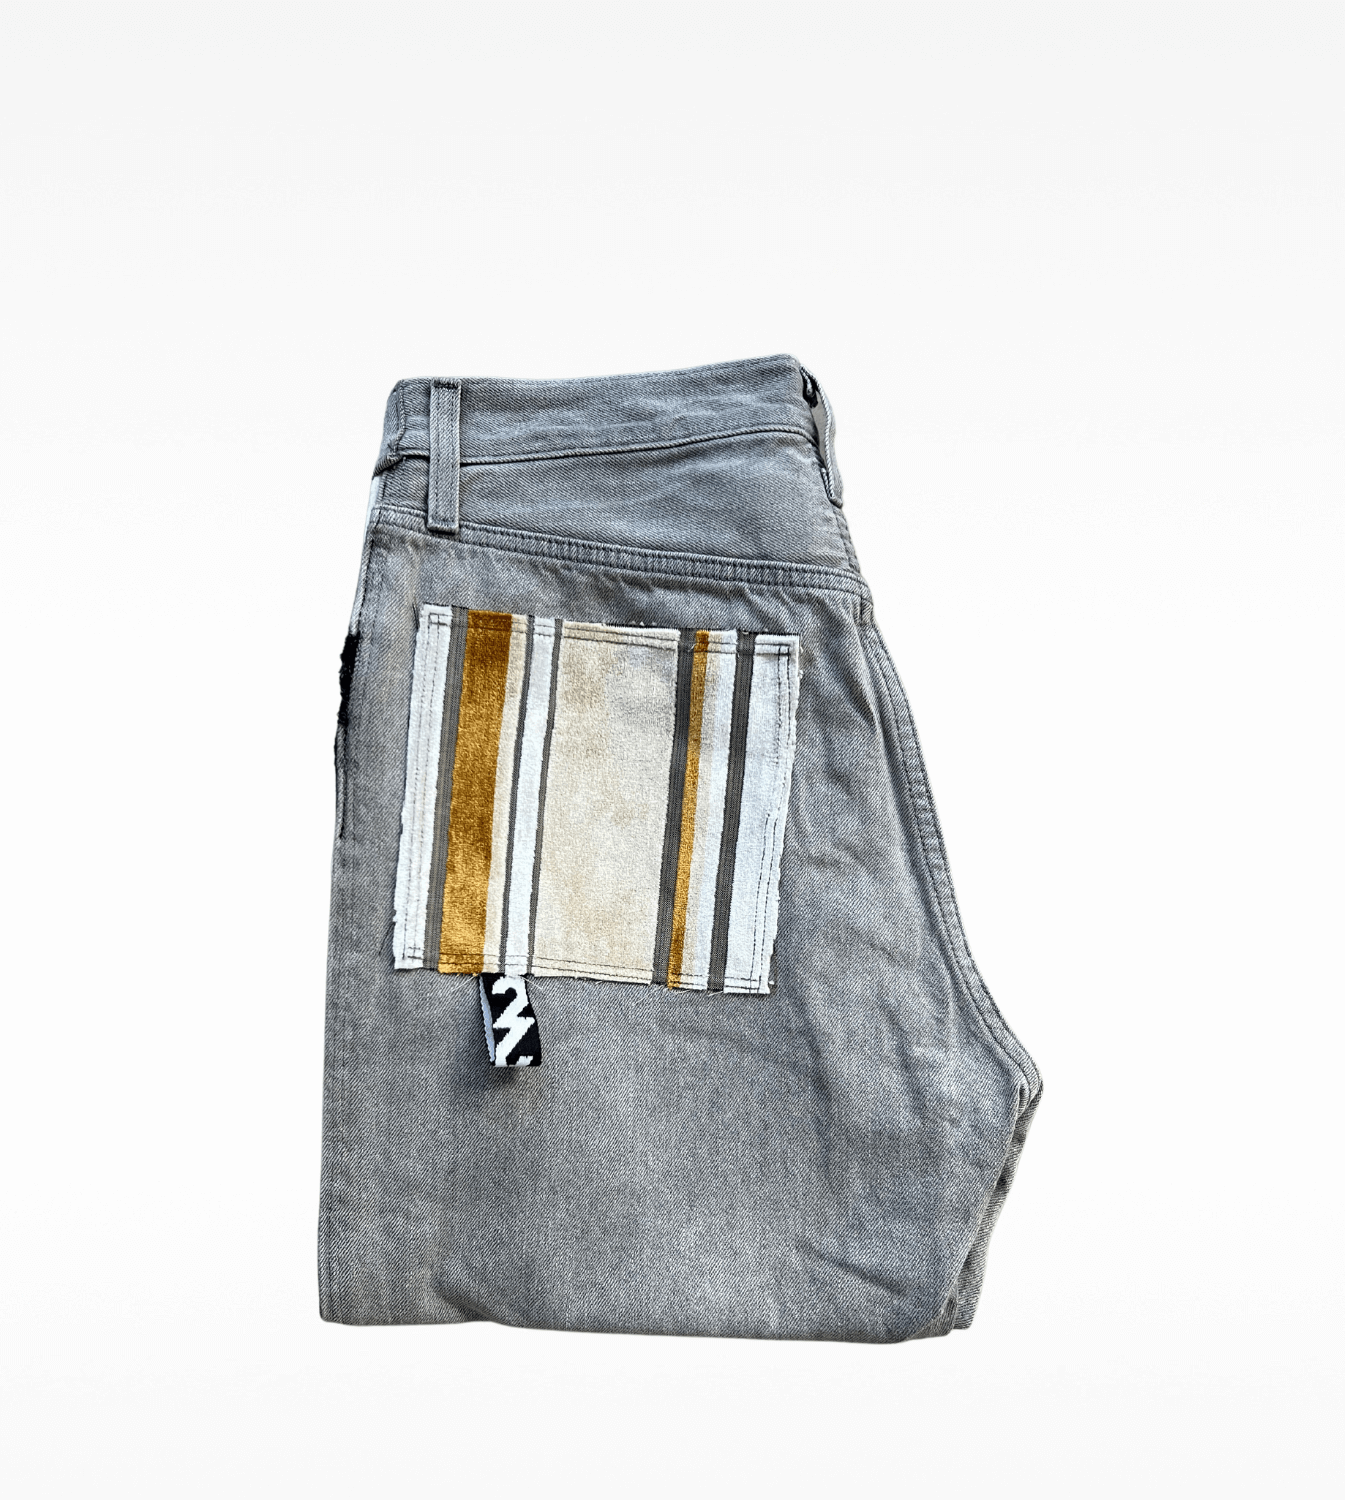 jeans-upcycling-levis-501-2ndechance-poche-details